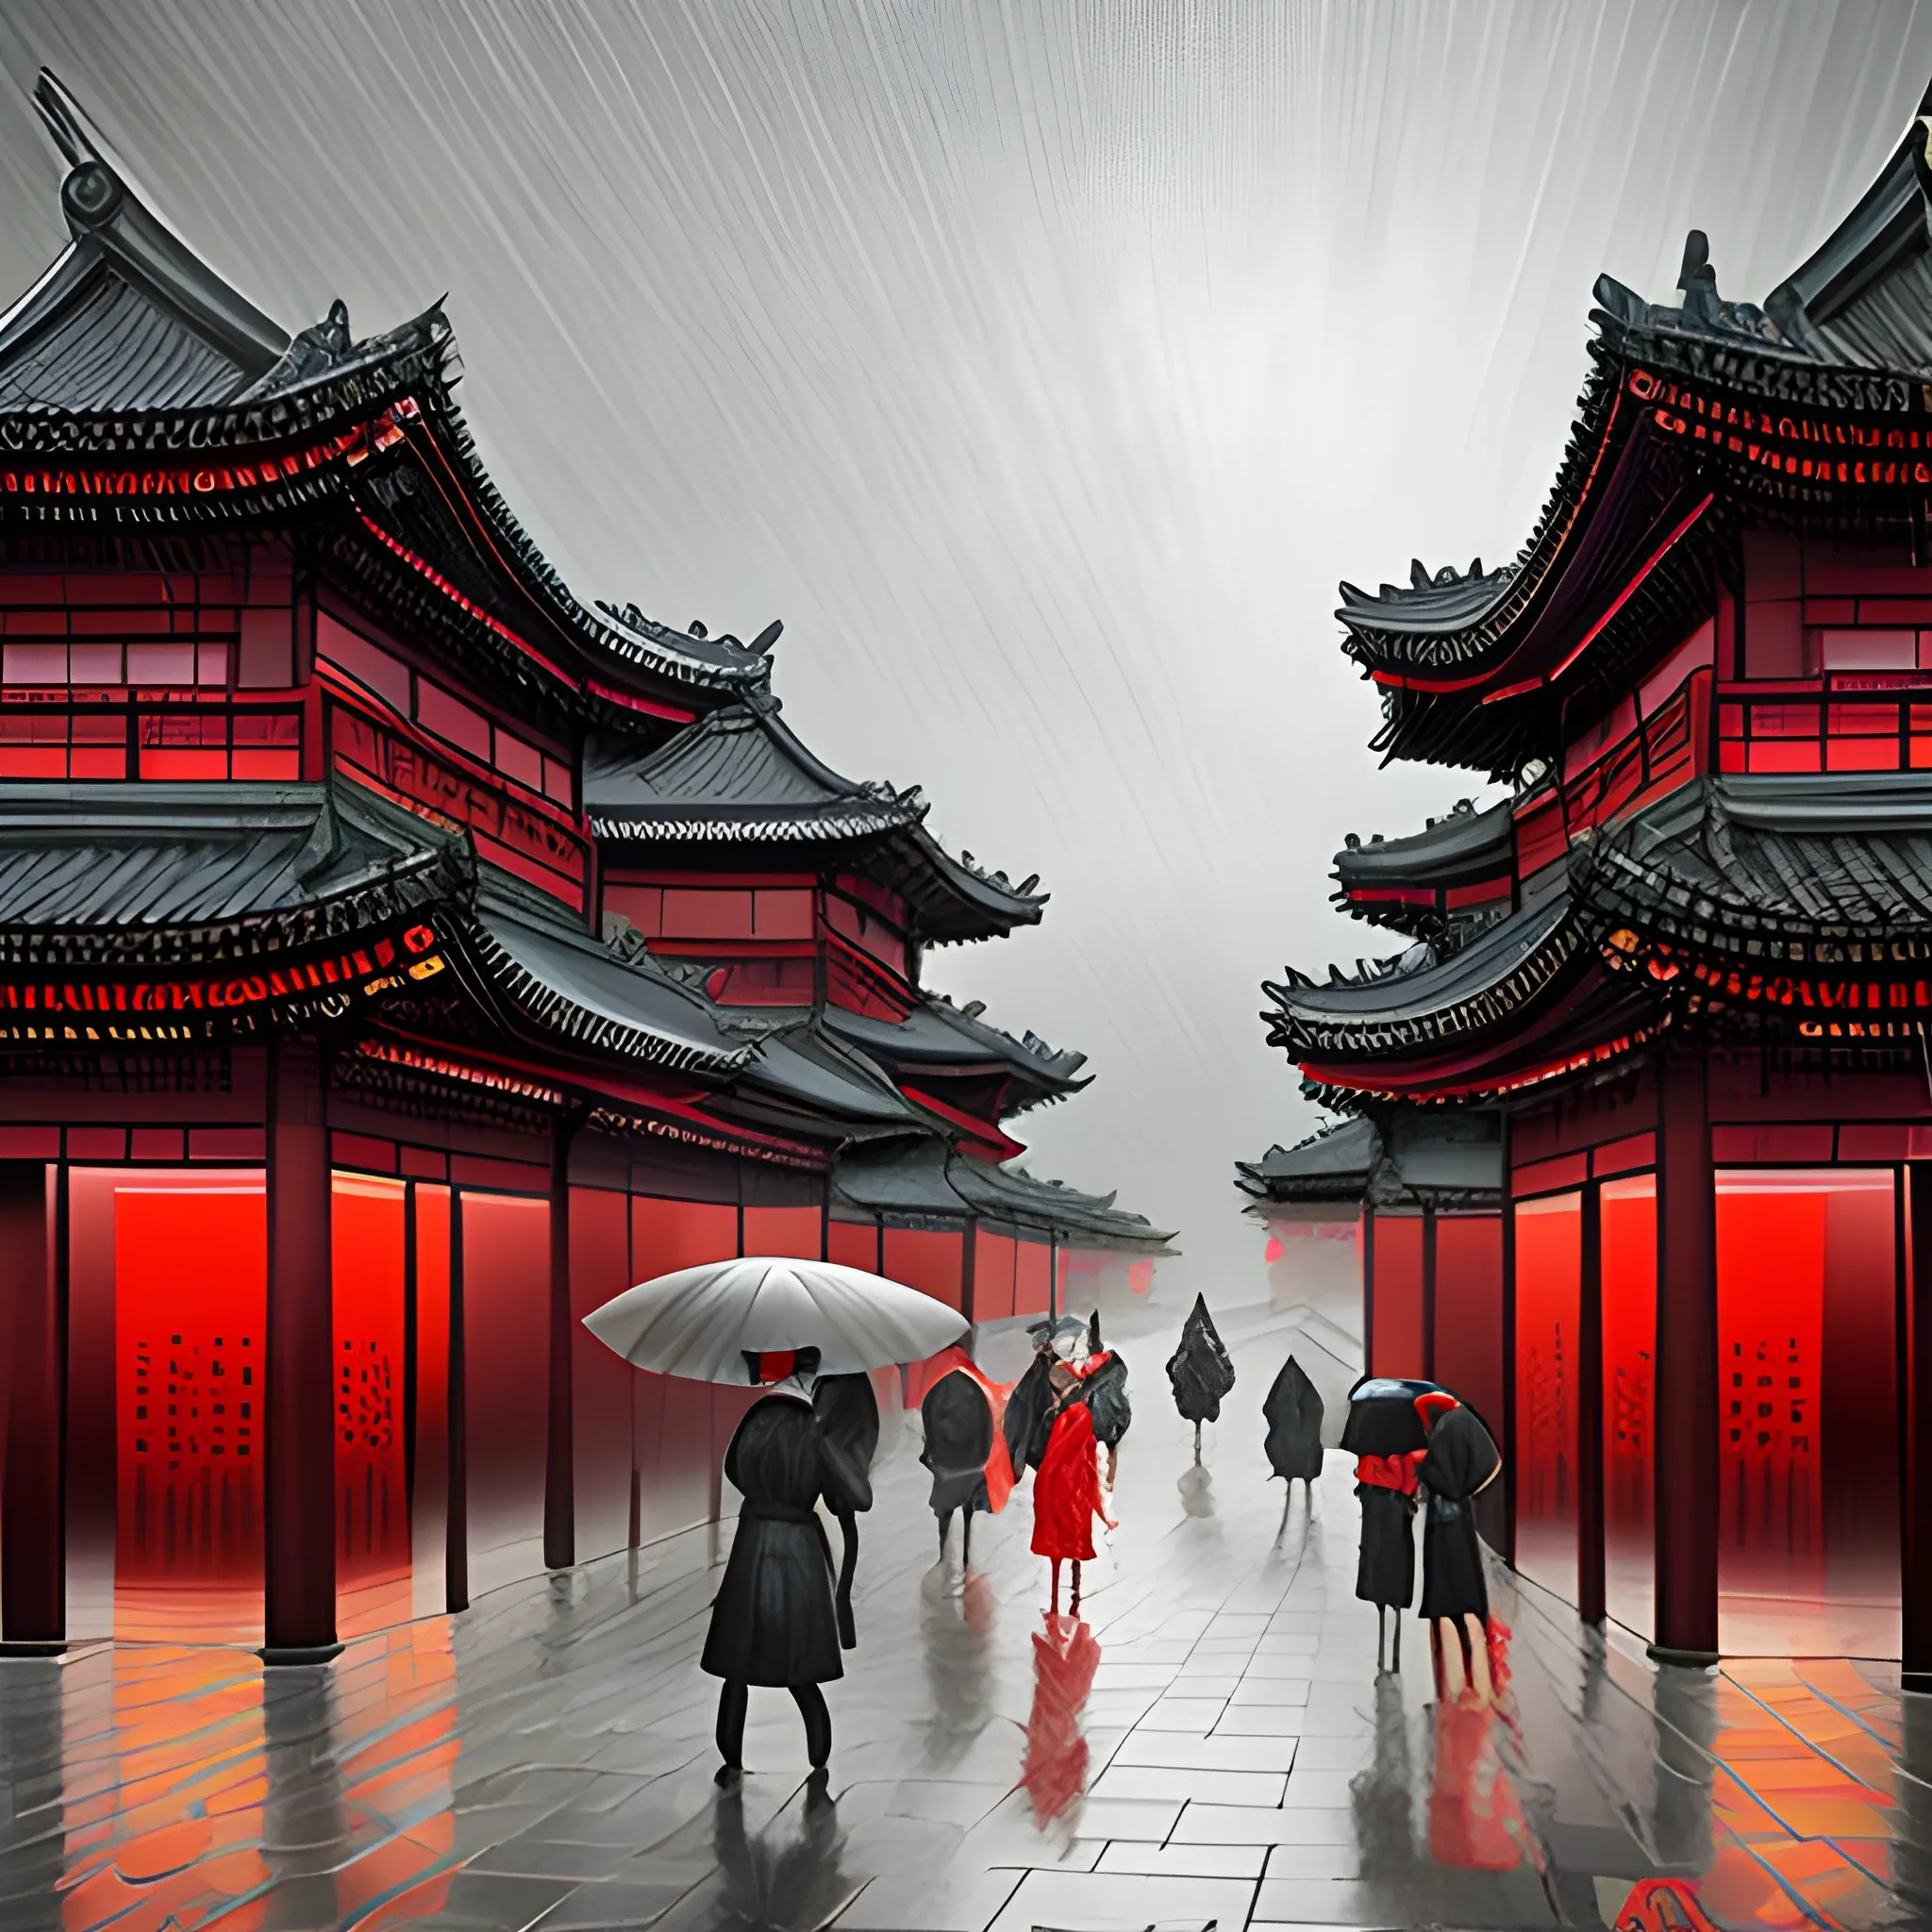 ancient Tang dynasty, metropolitan art style, bazaar, classical realism, surreal anime, cityscape, mysticism, gray tones and red, raindrops, cloudy sky